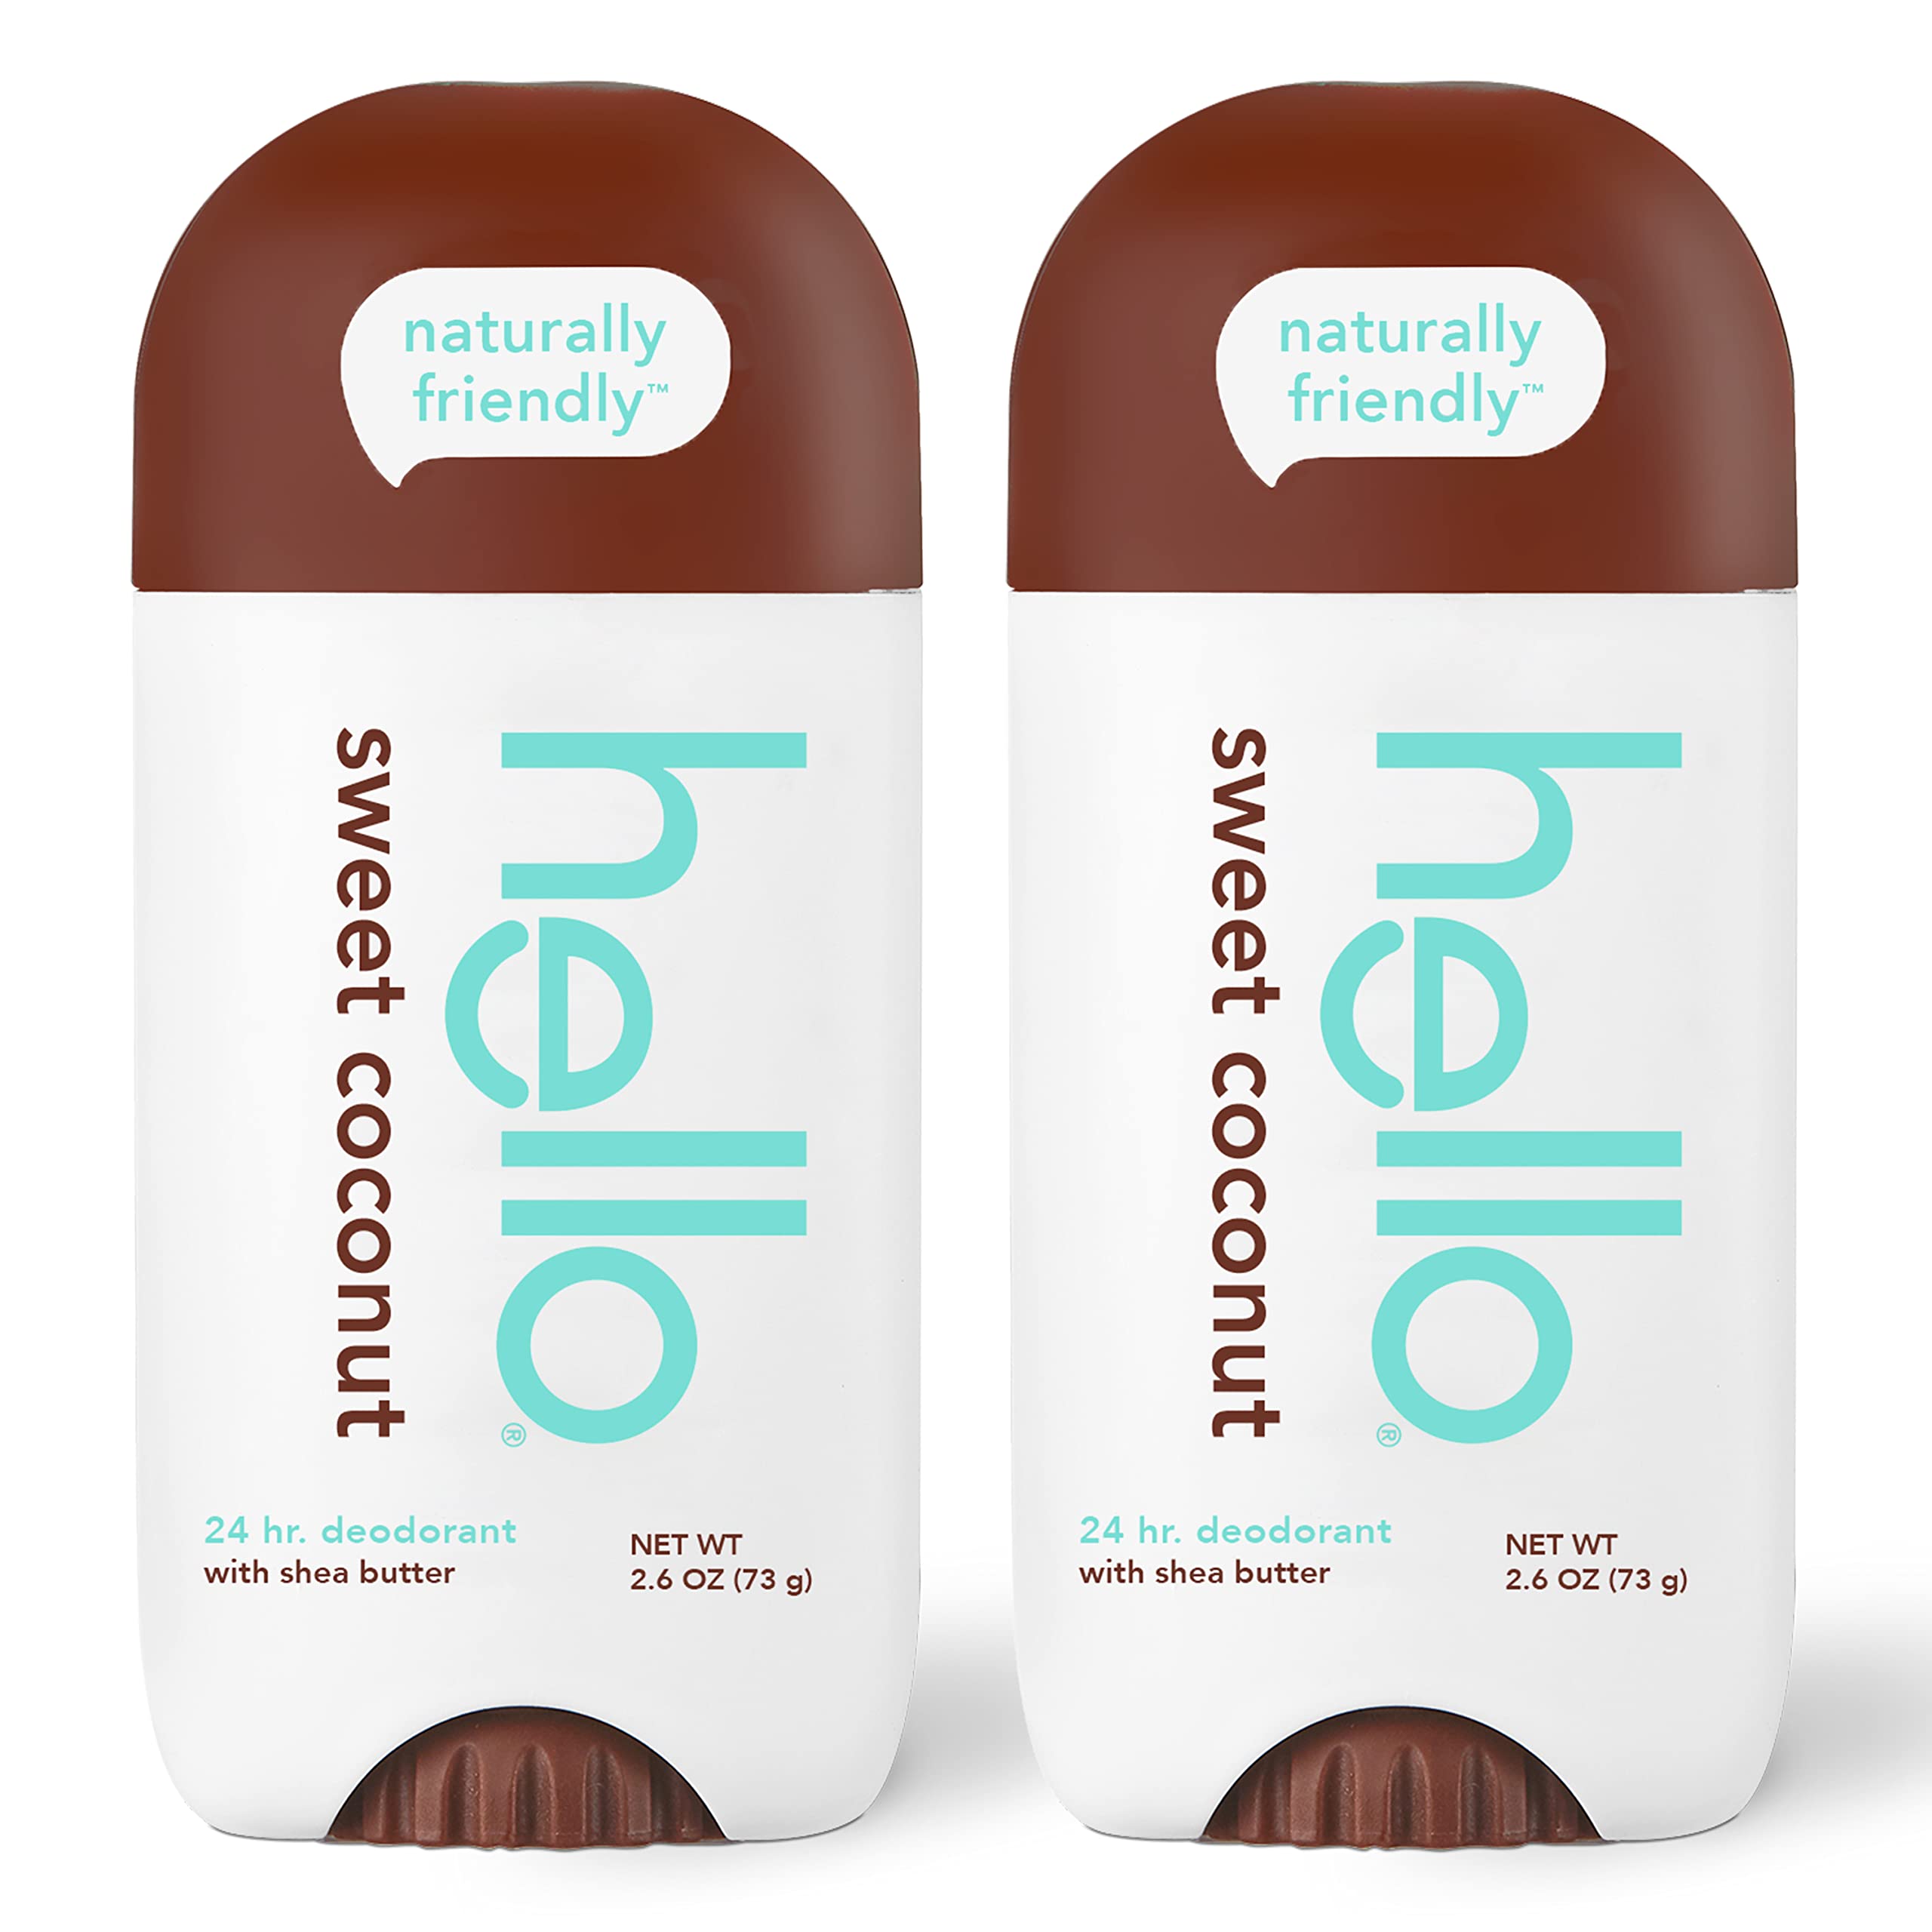 hello Sweet Coconut Deodorant With Shea Butter for Women + Men, Aluminum Free, Baking Soda Free, Parabens Free, 24 Hour Odor Protection, 2.6 Ounce, 2 Pack